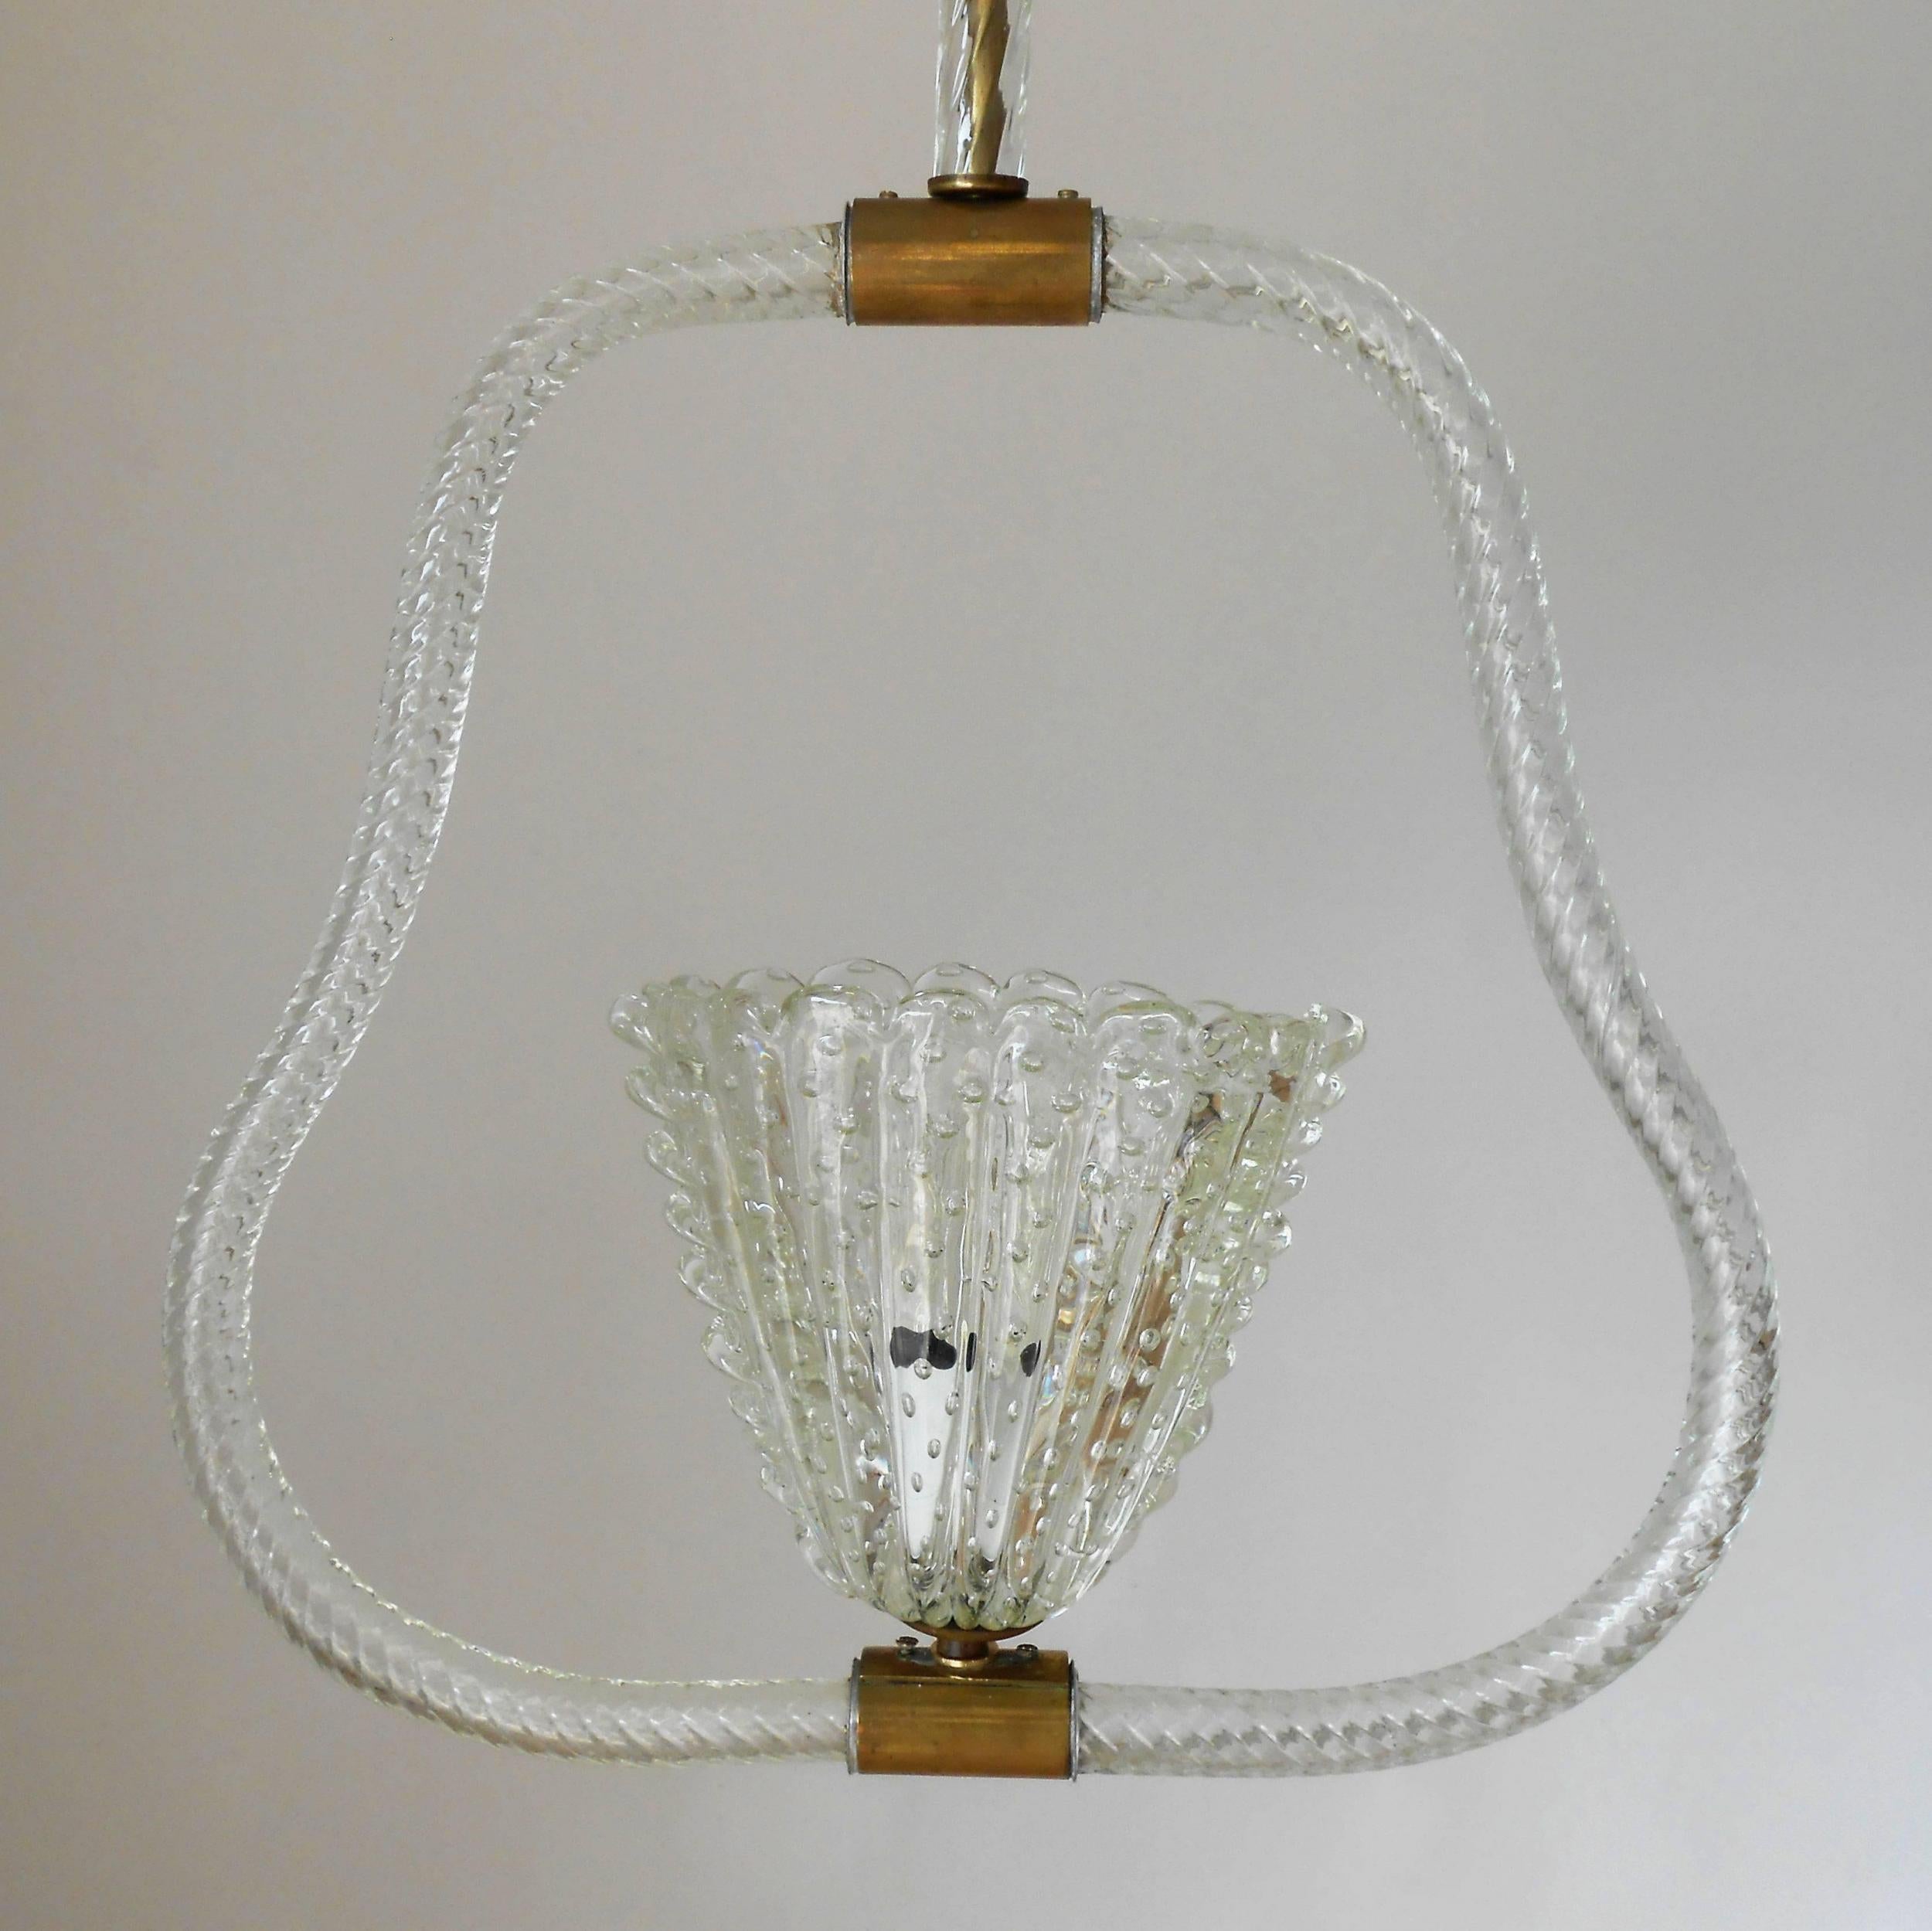 Vintage Italian Pendant Chandelier with Clear Murano Glass, Ercole Barovier 1